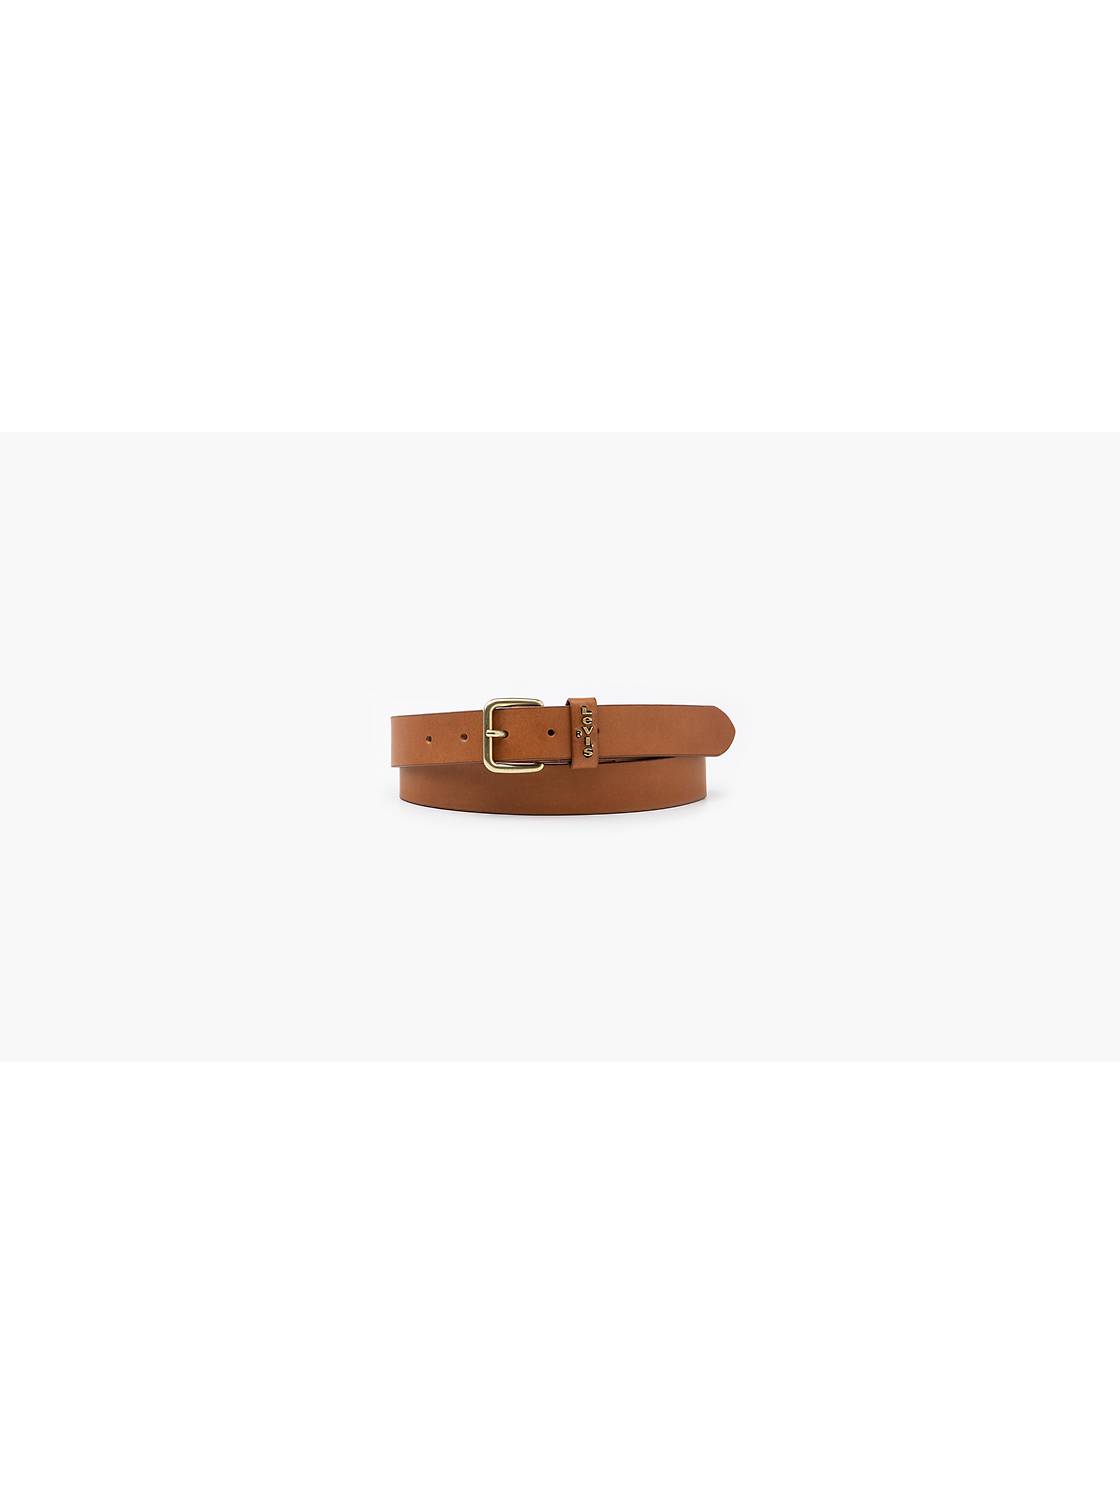 Lucky Brand Women's Reversible Smooth Leather Belt with Old English Brass  Harness Buckle - XL - Tan/Natural, Tan/Natural, Extra Large : :  Fashion